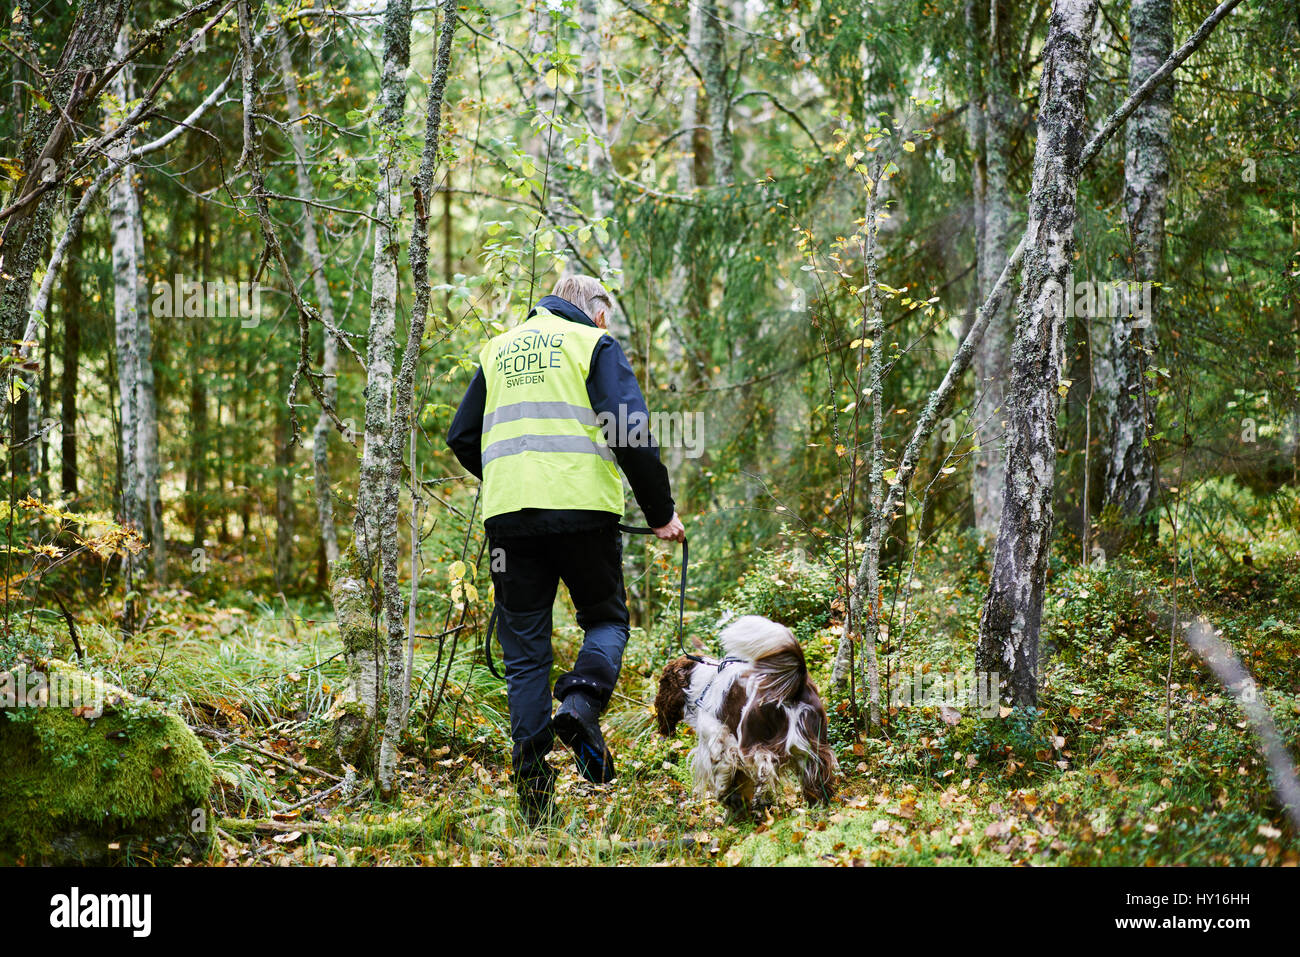 Sweden, Uppland, Rison, Volunteer with dog helping emergency services find missing people Stock Photo